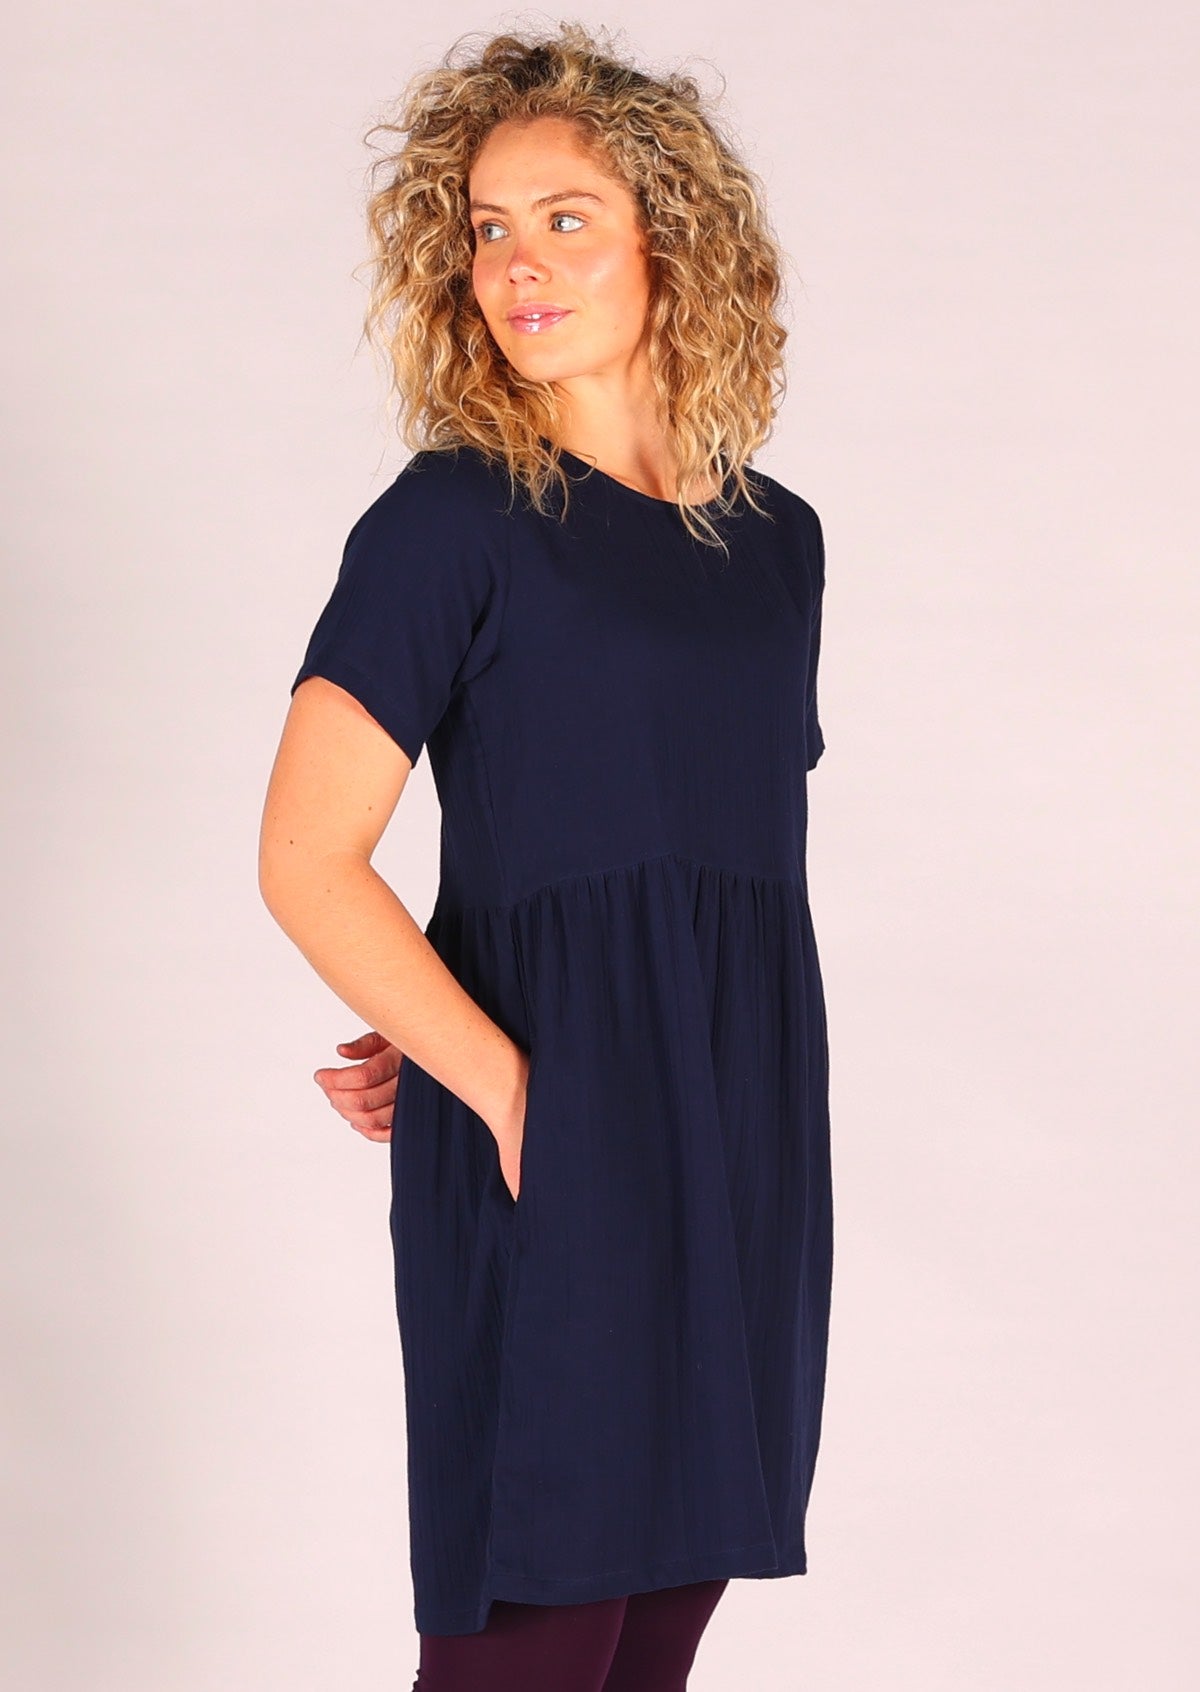 Relaxed fit cotton gauze dress in dark blue with hidden side pockets